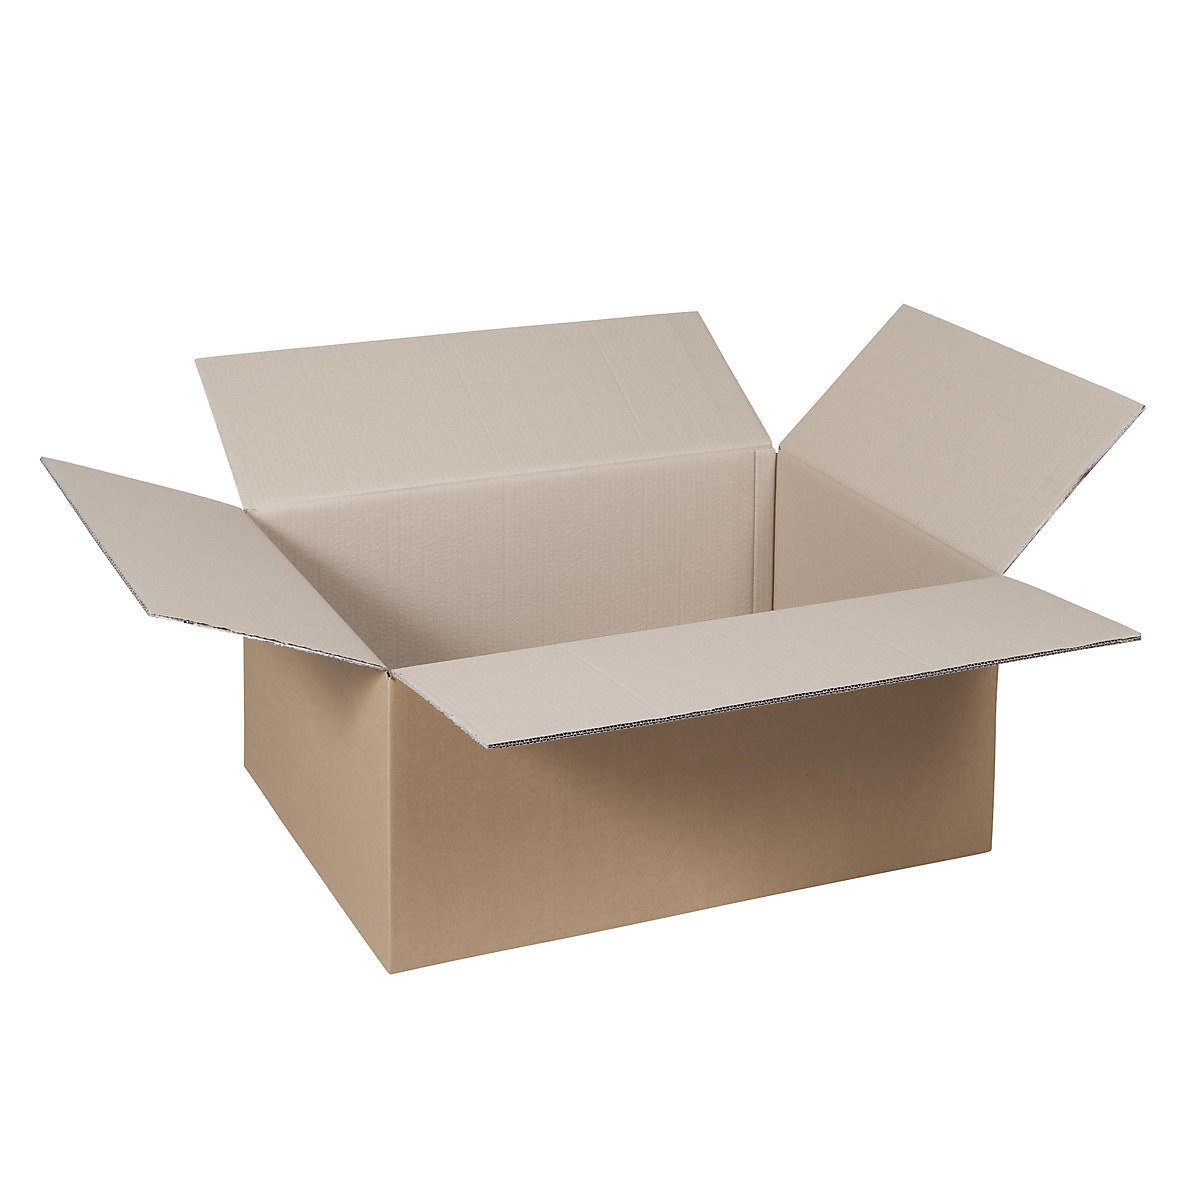 Folding cardboard box, FEFCO 0201, made of double fluted cardboard, internal dimensions 390 x 290 x 200 mm, pack of 100-45